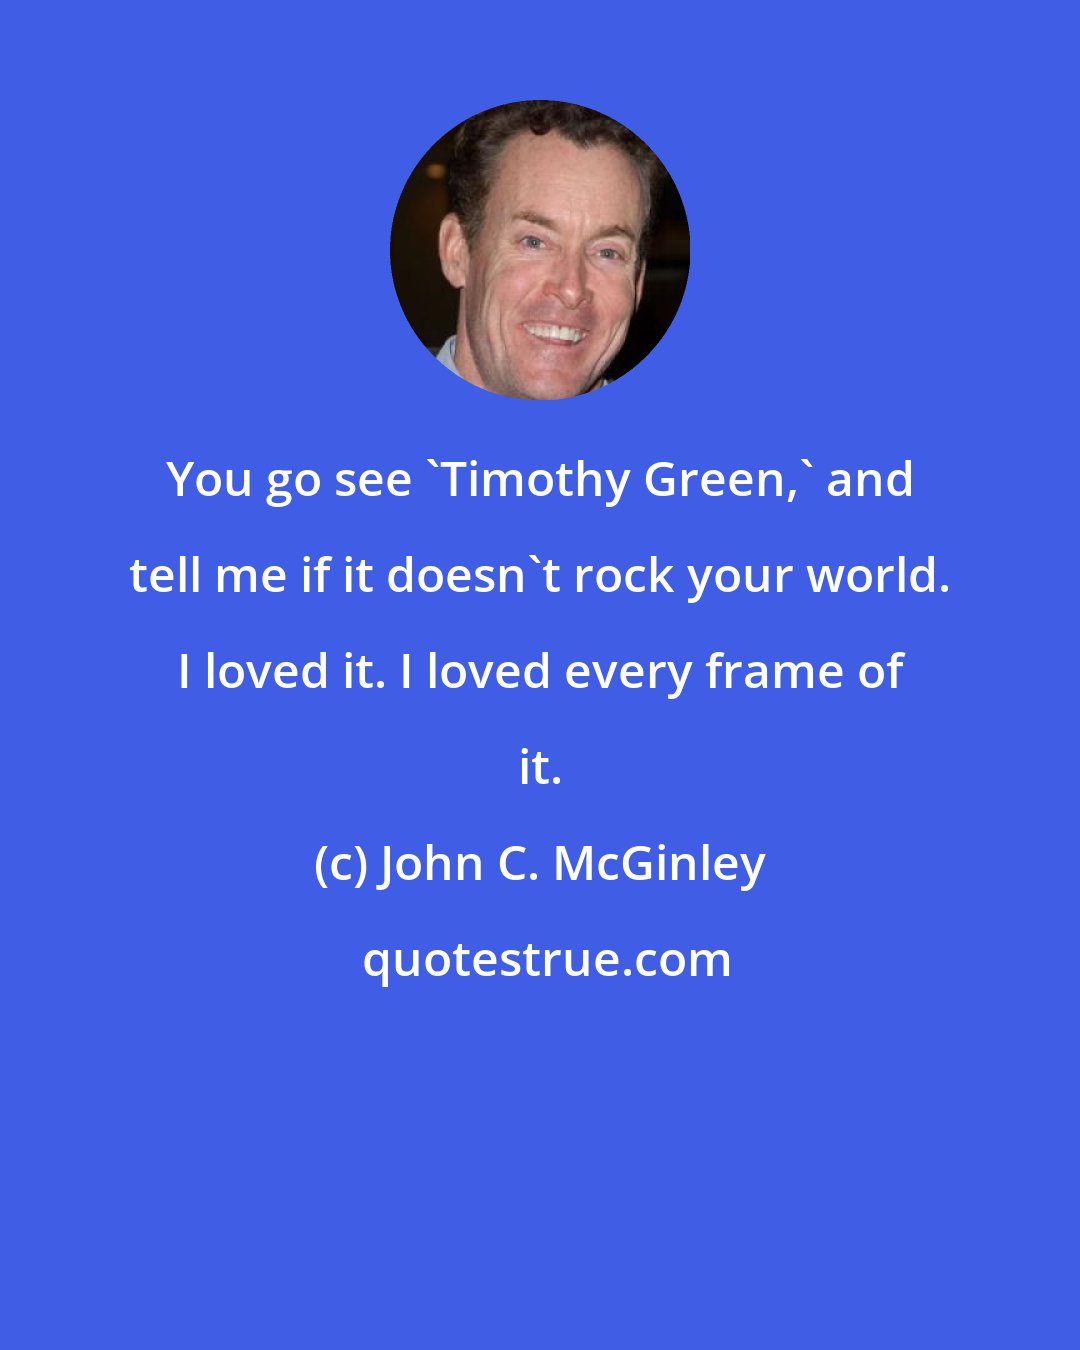 John C. McGinley: You go see 'Timothy Green,' and tell me if it doesn't rock your world. I loved it. I loved every frame of it.